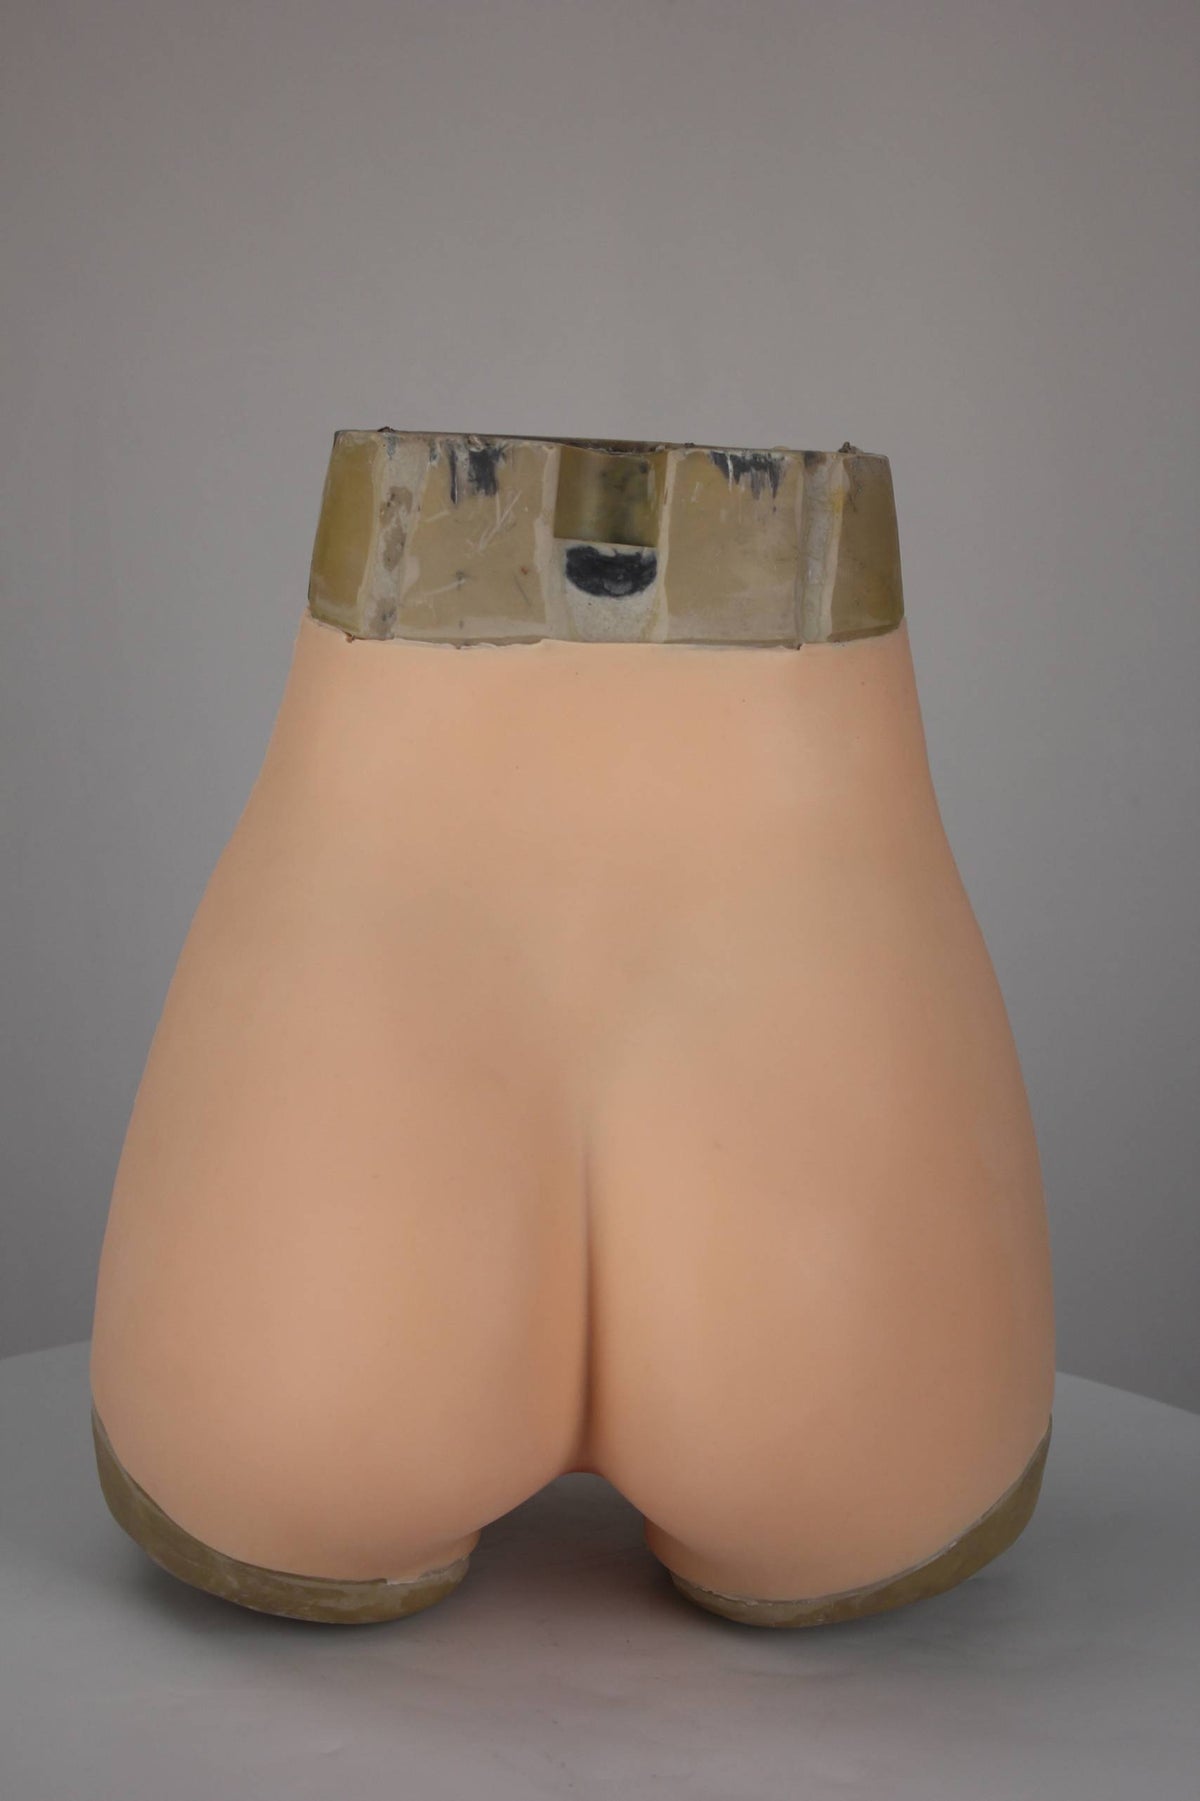 Realistic Wearable Silicone Boxer with Vagina, plus Butt Enhanced Effect